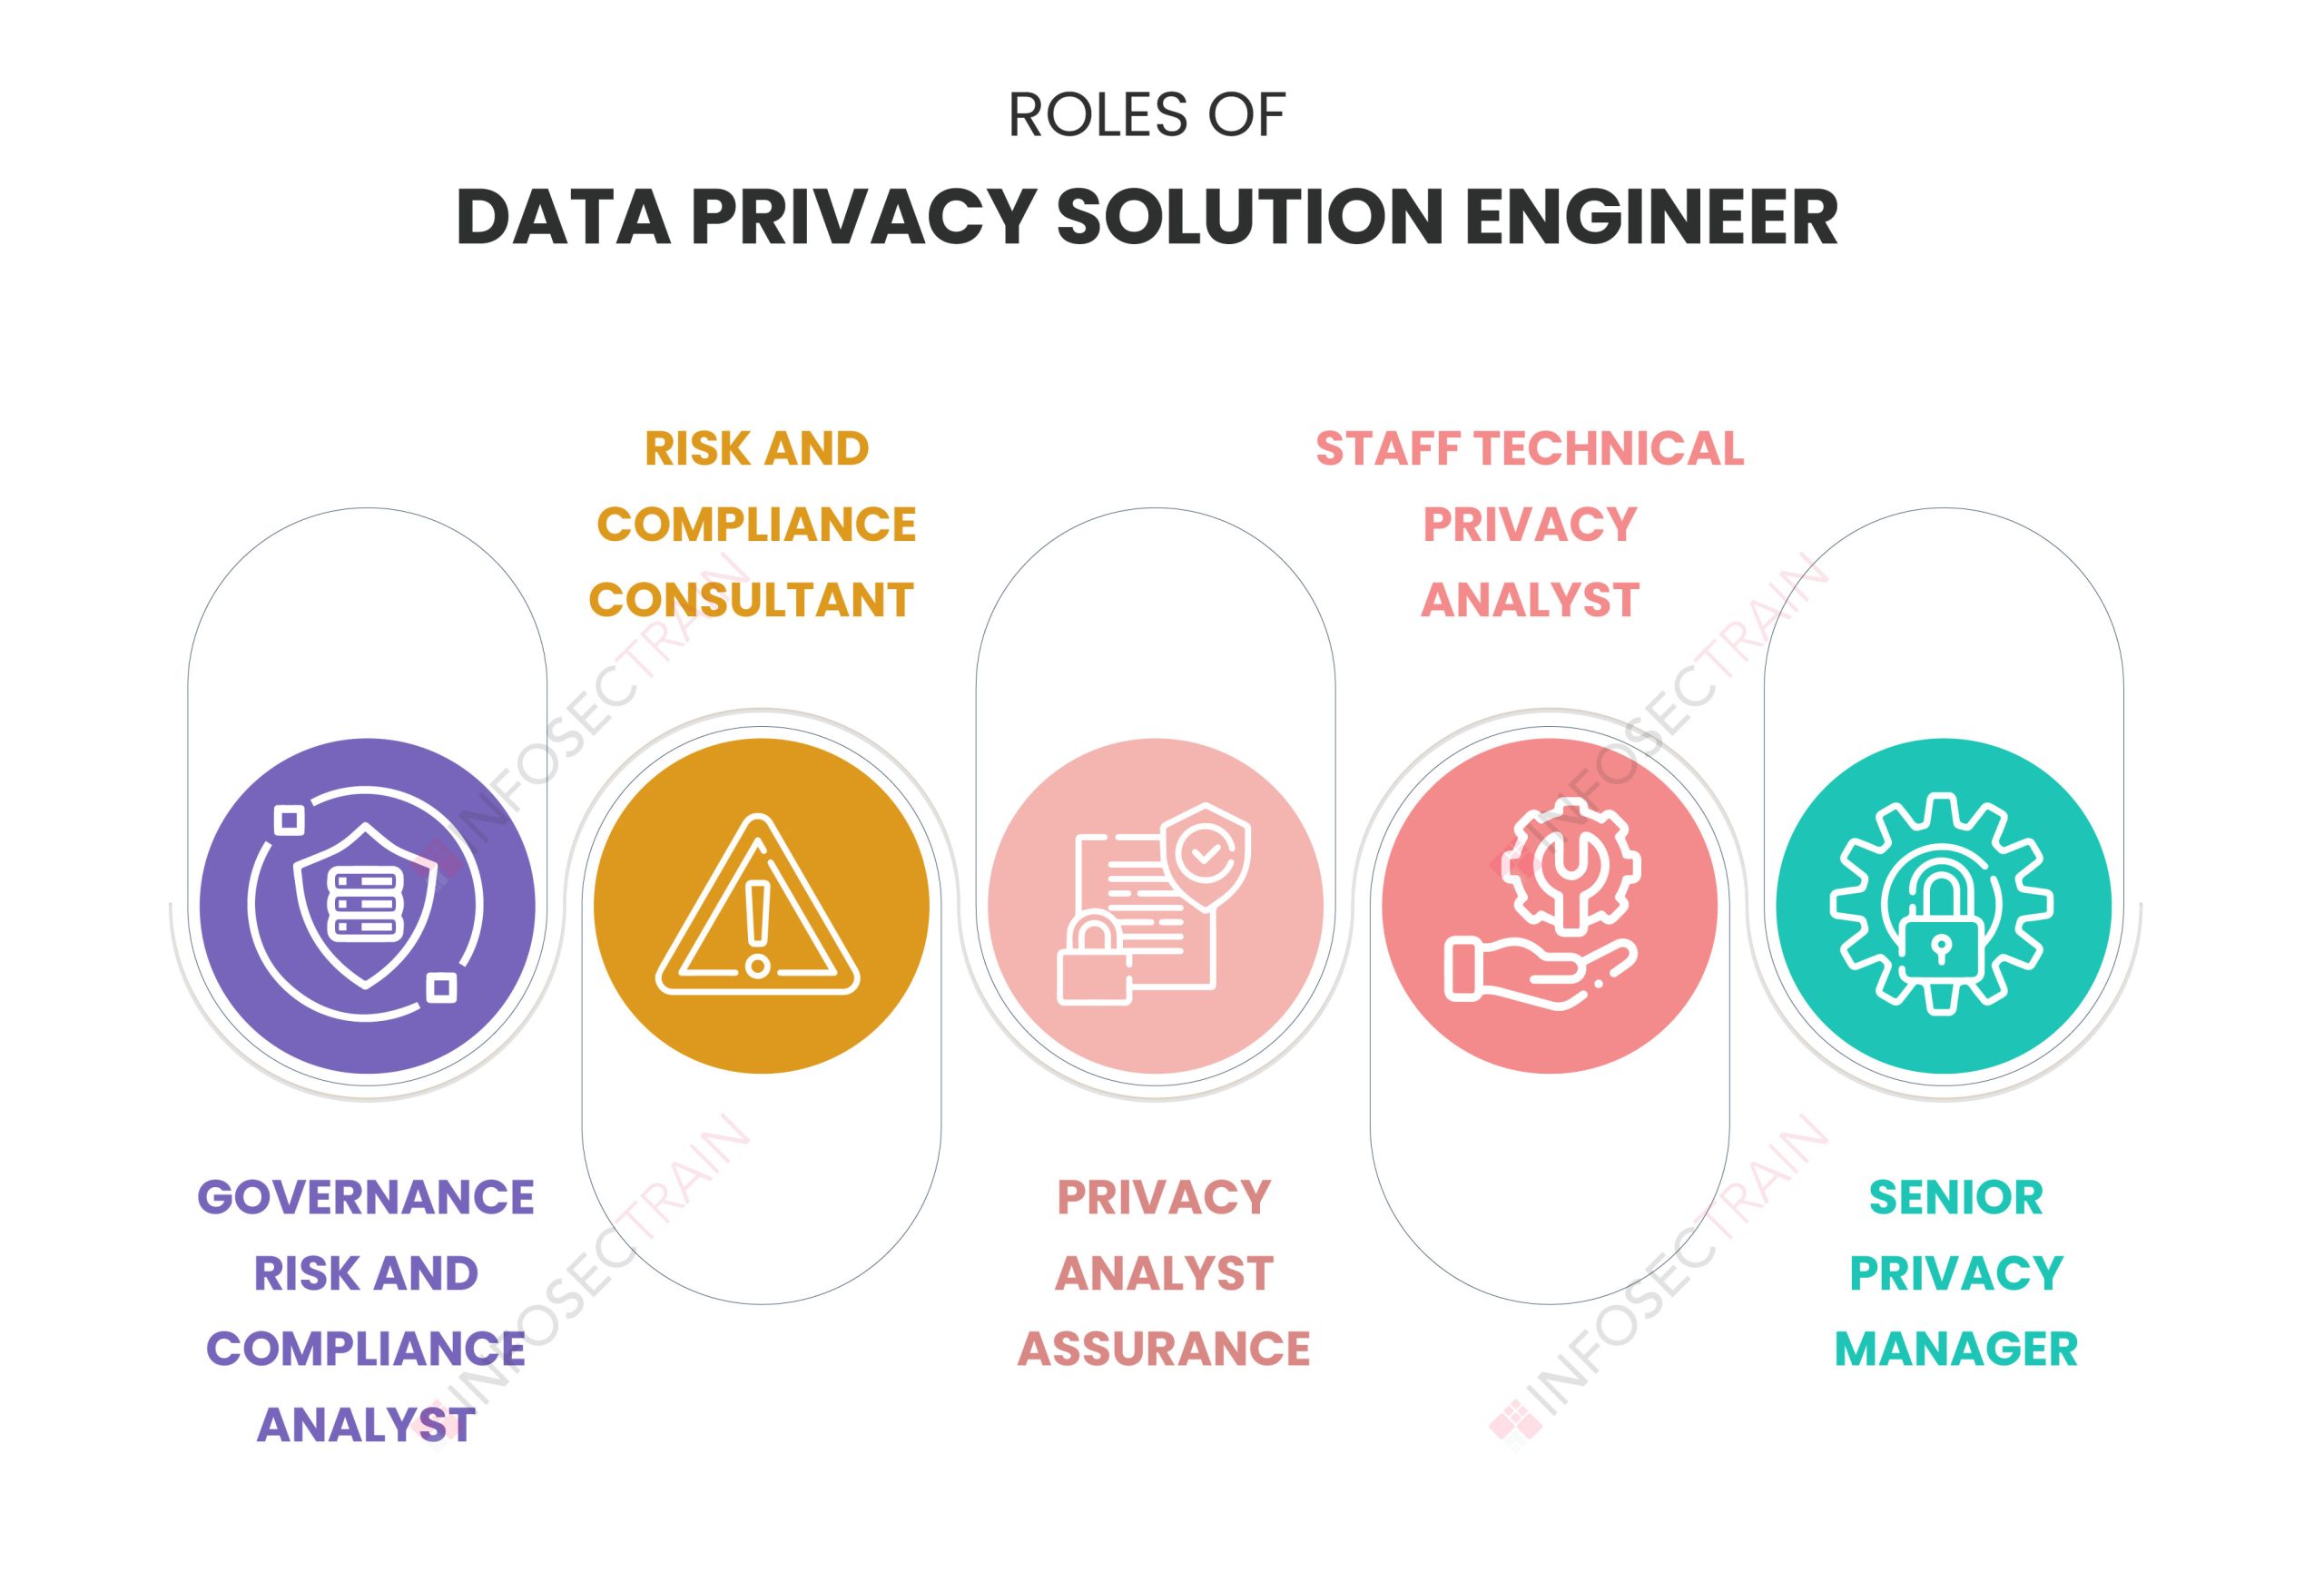 Roles of Data Privacy Solution Engineer